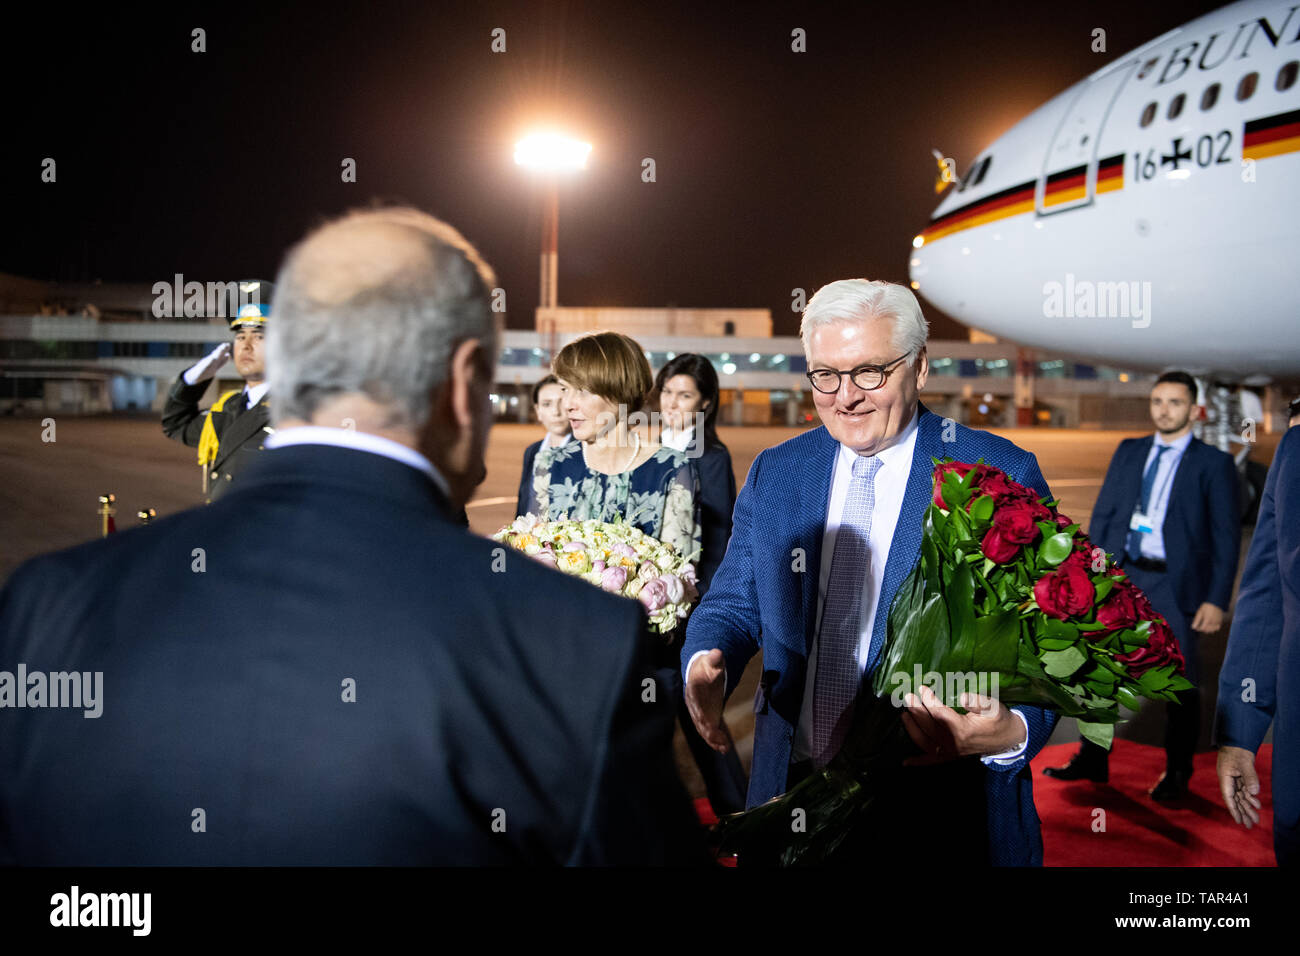 Taschkent, Uzbekistan. 27th May, 2019. Federal President Frank-Walter Steinmeier (r) and his wife Elke Büdenbender arrive at Yushny International Tashkent Airport and are welcomed there by Abdulasis Kamilov, Foreign Minister of Uzbekistan. President Steinmeier and his wife are on a two-day state visit to Uzbekistan. They are accompanied by numerous business representatives and cultural workers. Credit: Bernd von Jutrczenka/dpa/Alamy Live News Stock Photo